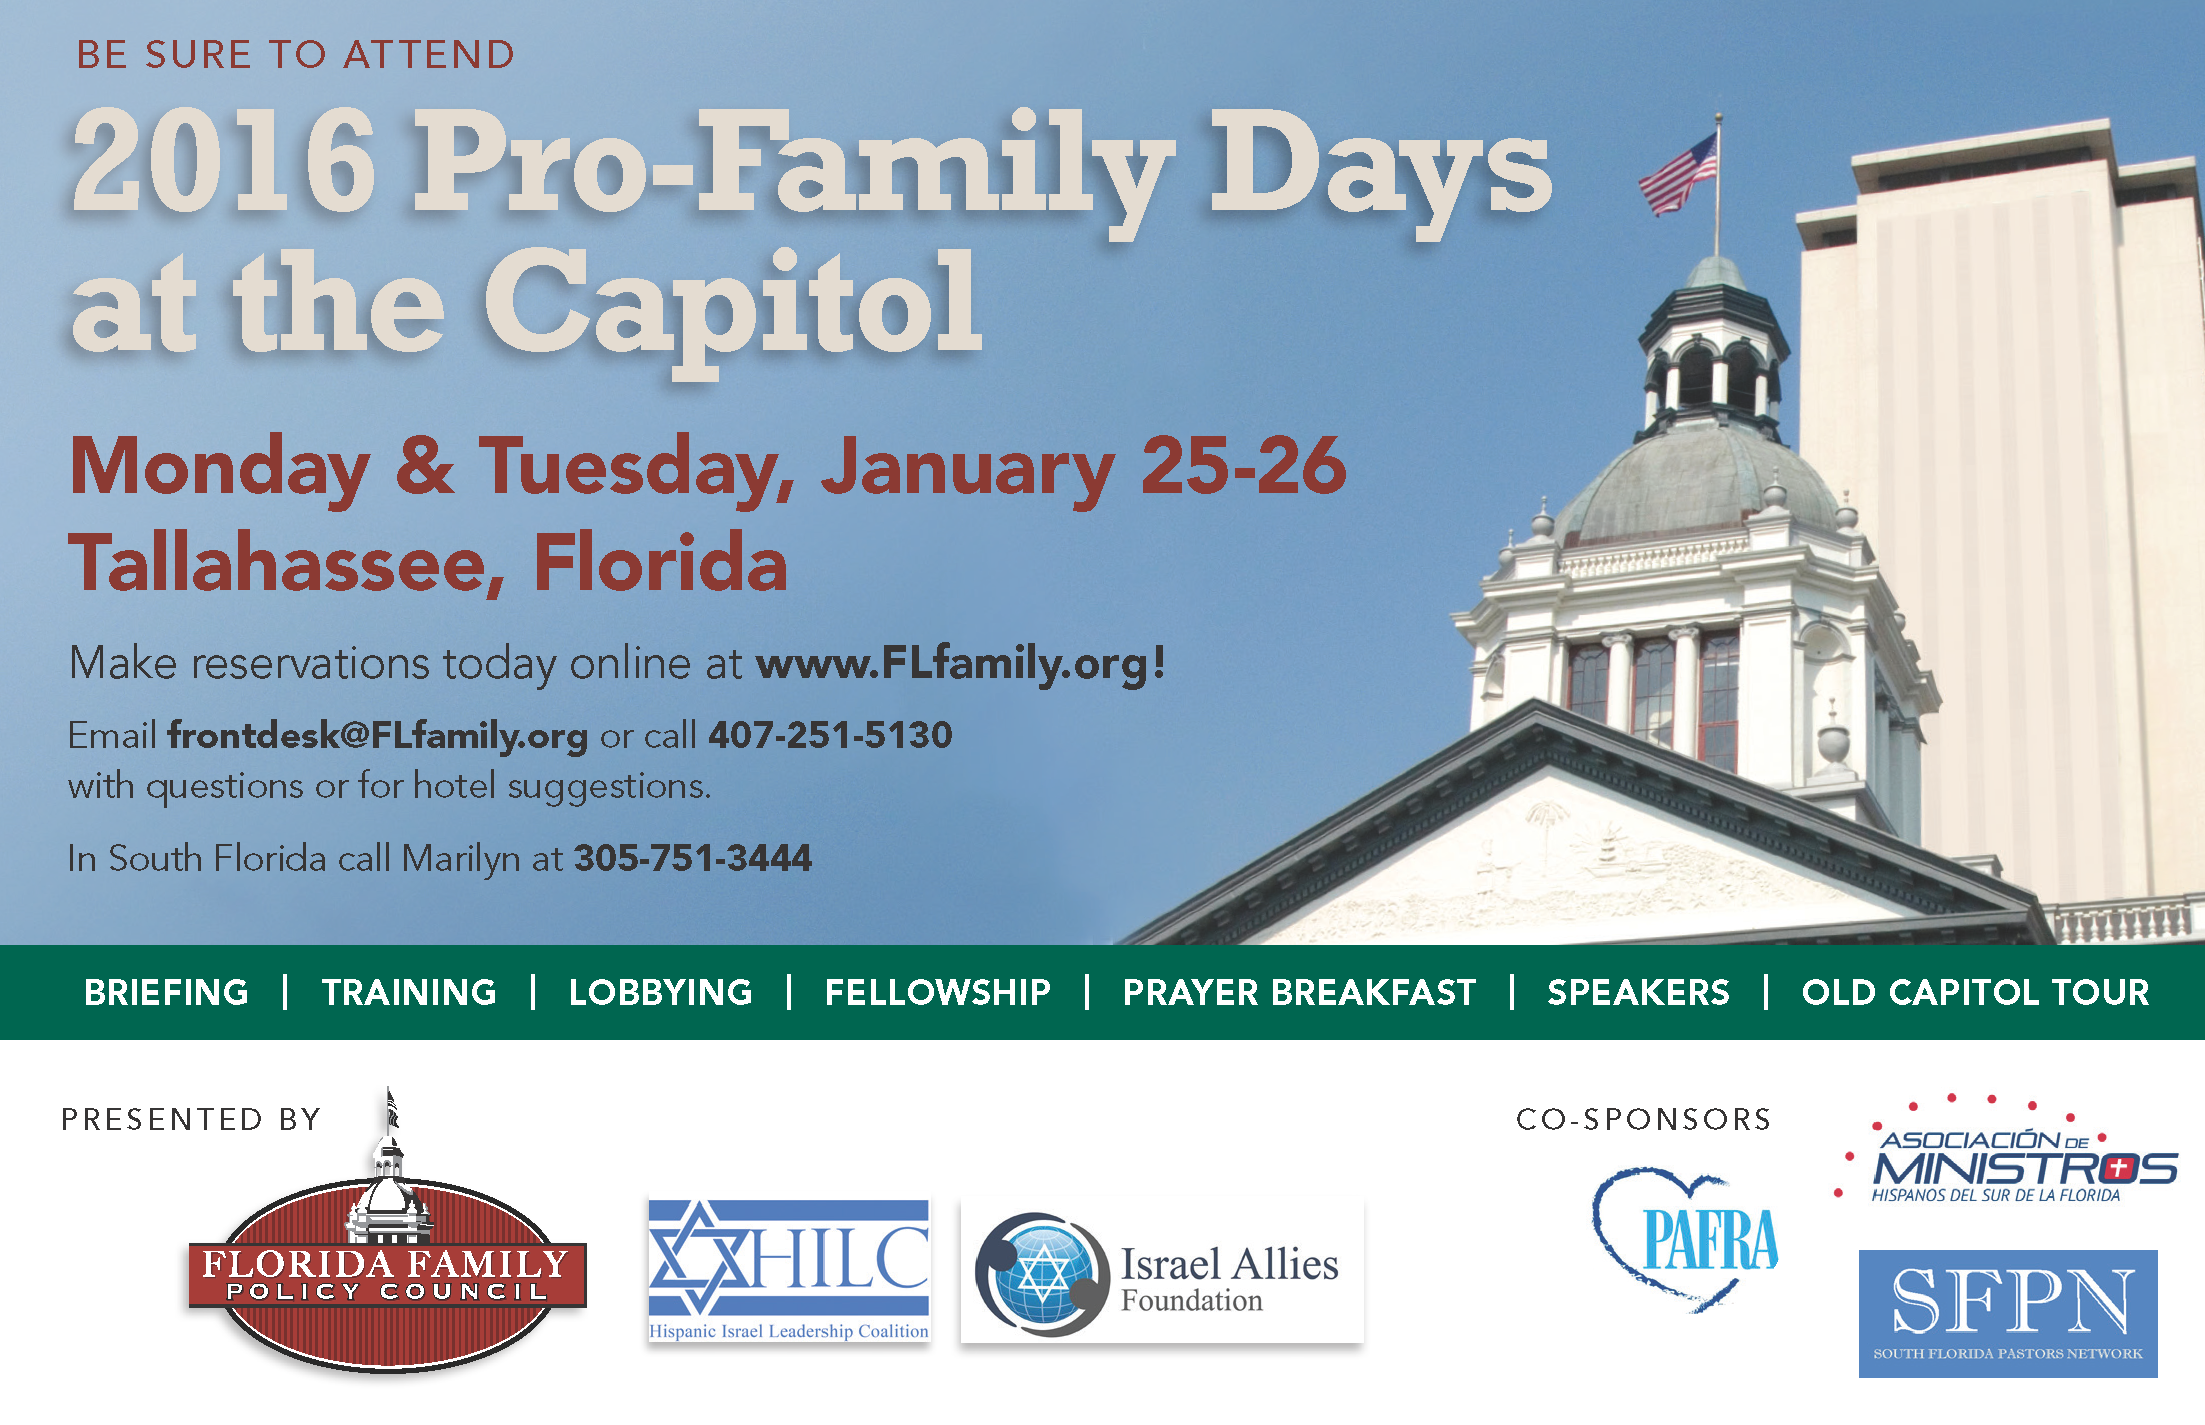 Pro-Family Days at the Capitol & Prayer Breakfast in only 14 days! Sign up today for this life changing experience!